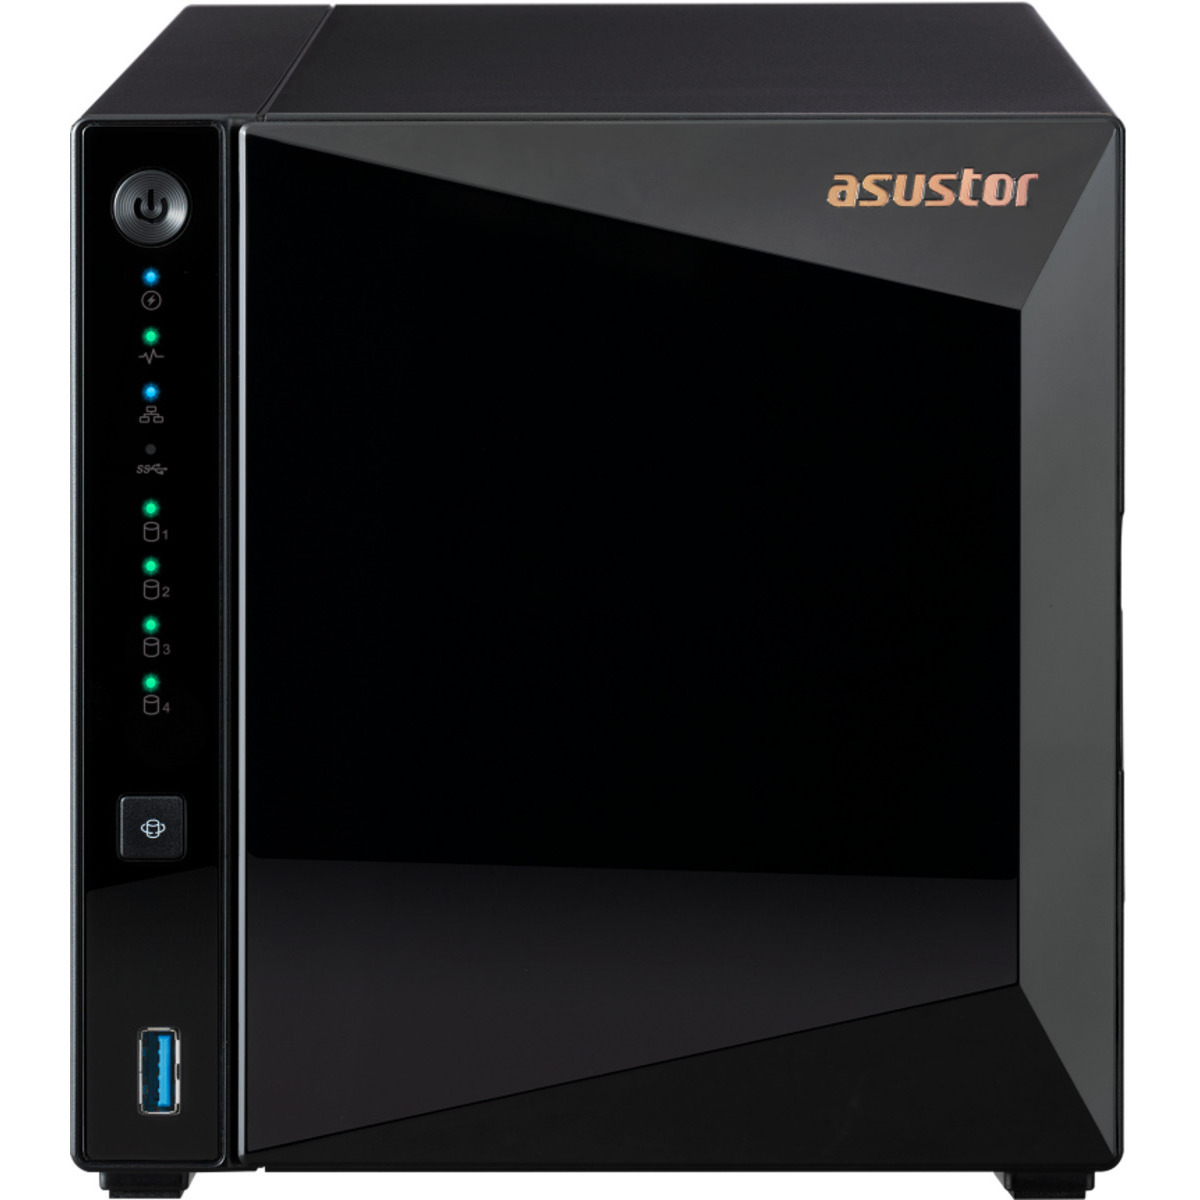 ASUSTOR DRIVESTOR 4 Pro Gen2 AS3304T v2 96tb 4-Bay Desktop Personal / Basic Home / Small Office NAS - Network Attached Storage Device 4x24tb Seagate IronWolf Pro ST24000NT002 3.5 7200rpm SATA 6Gb/s HDD NAS Class Drives Installed - Burn-In Tested - ON SALE DRIVESTOR 4 Pro Gen2 AS3304T v2